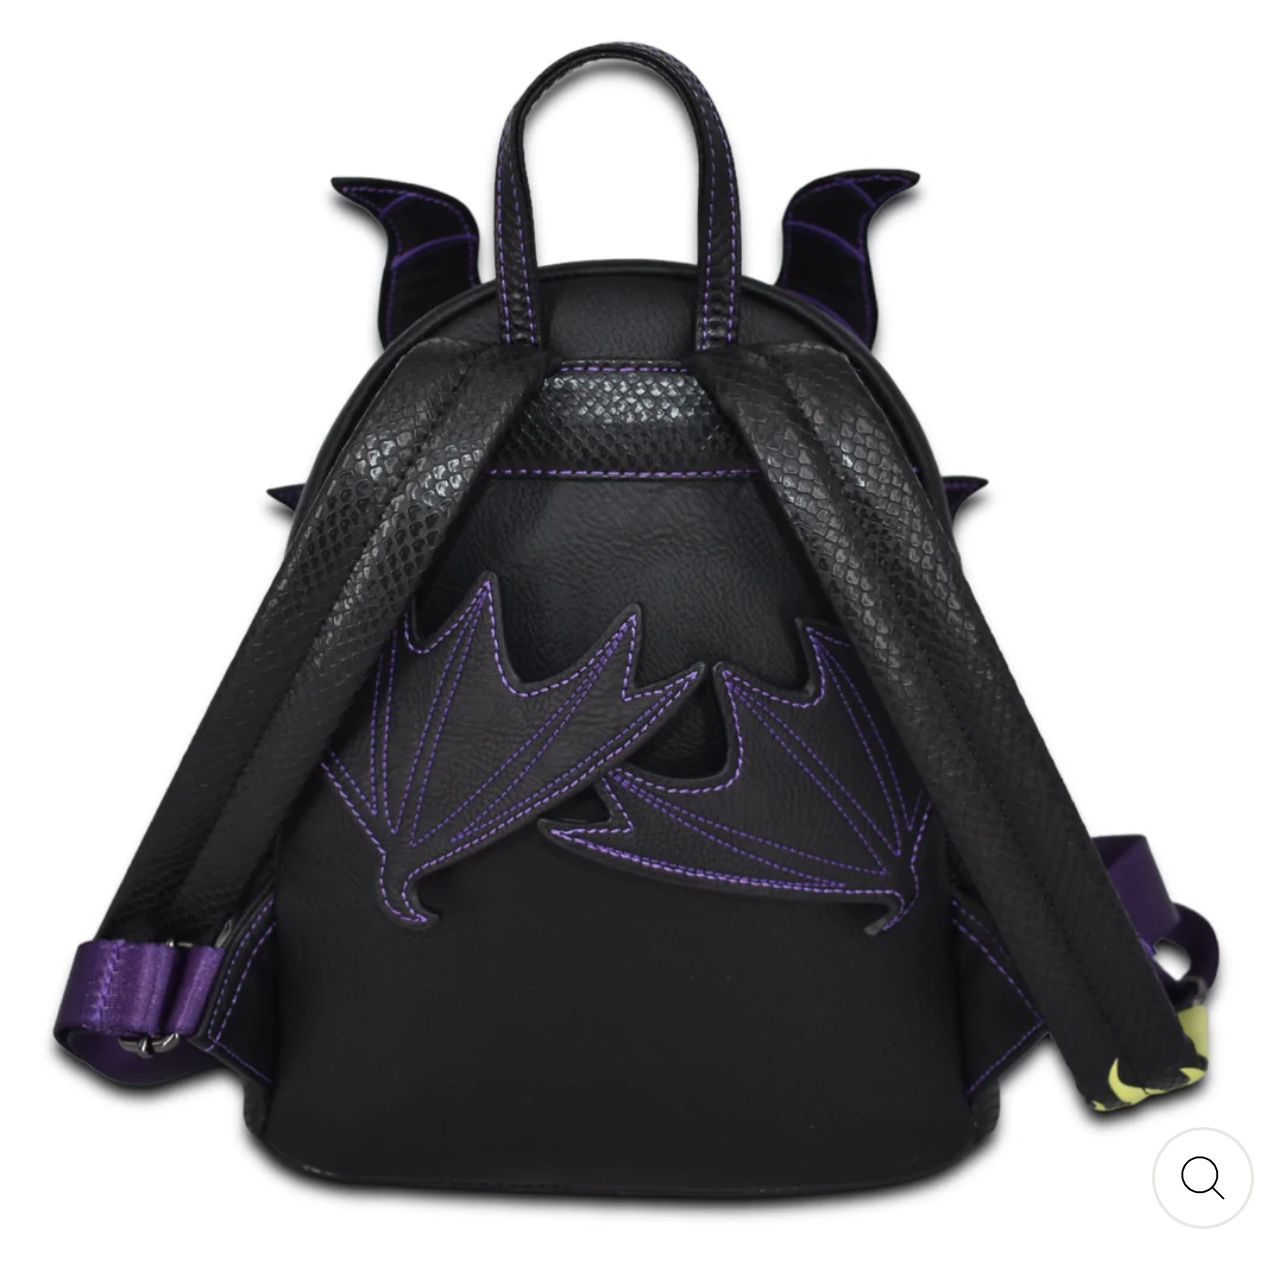 Maleficent Dragon Cosplay Loungefly for Sale in Oxnard, CA - OfferUp